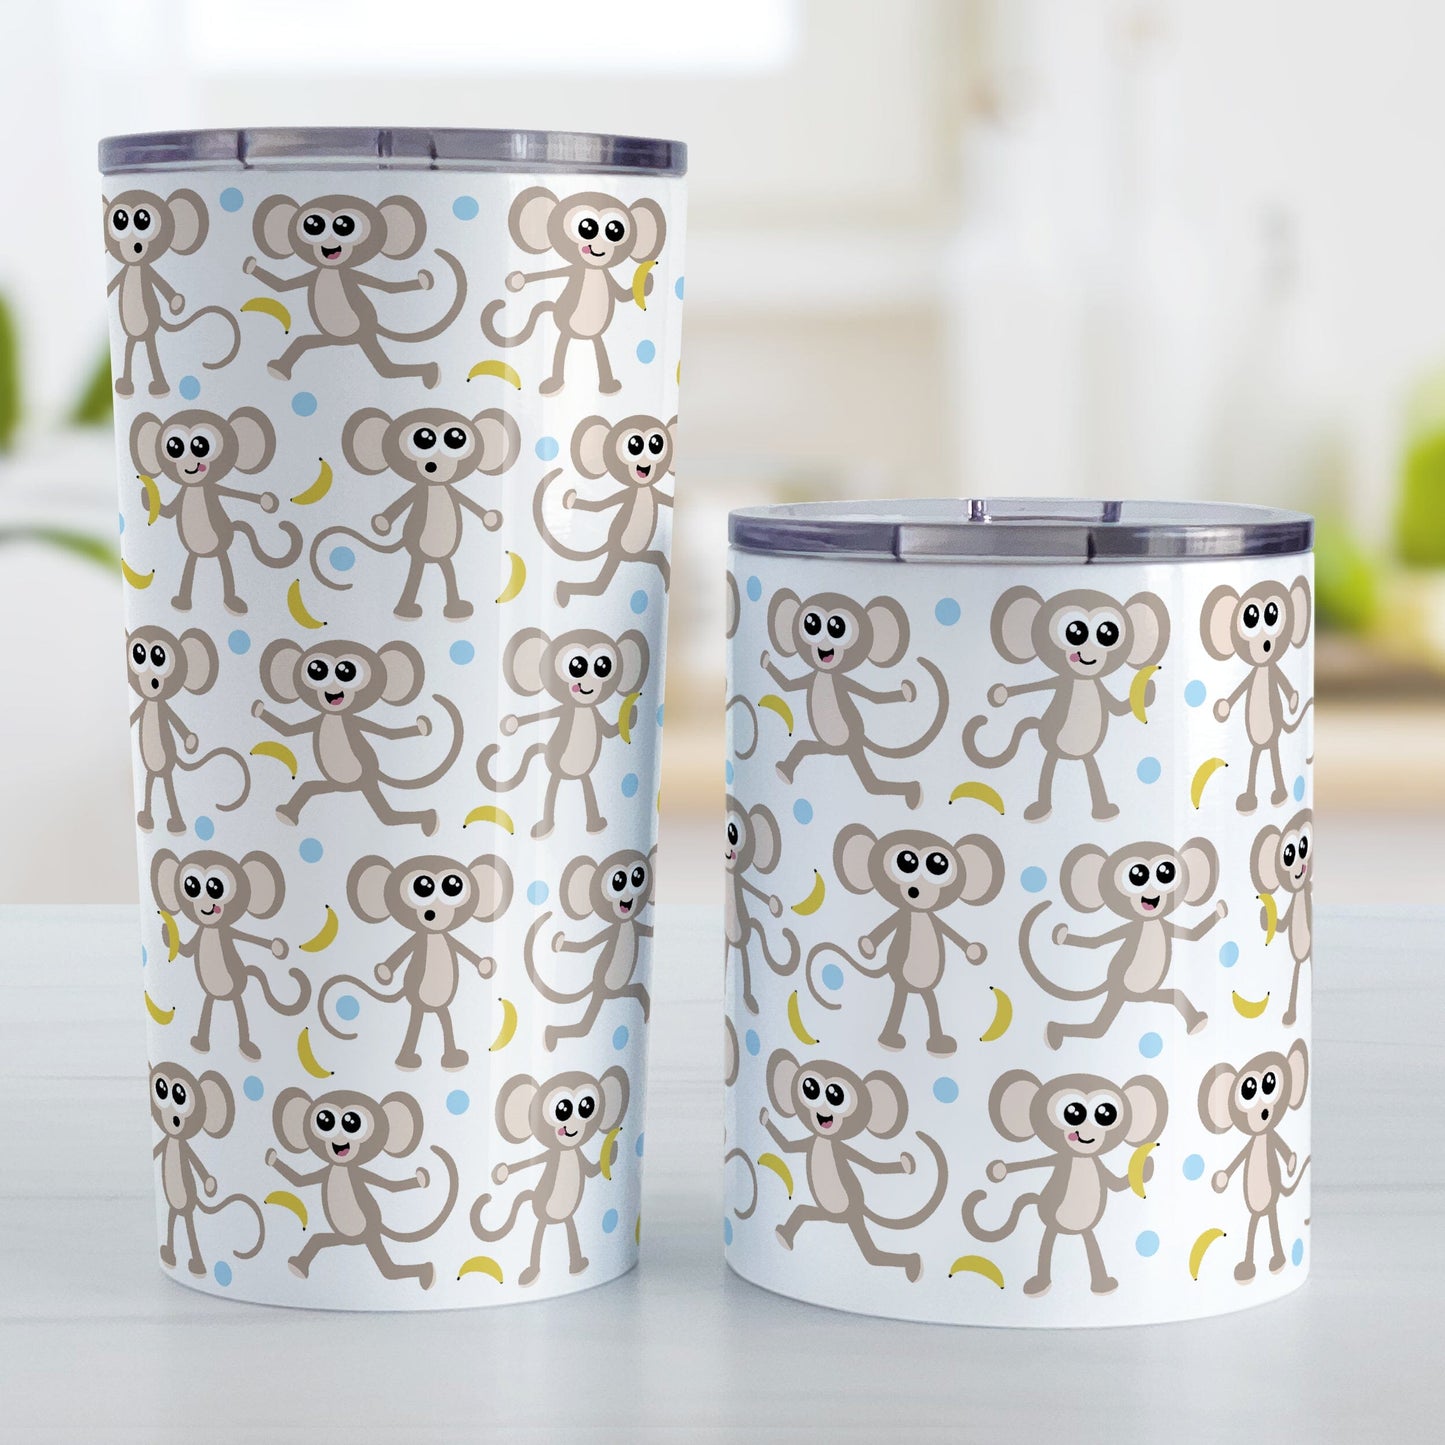 Cute Monkey Pattern with Blue Dots Tumbler Cup (20oz or 10oz) at Amy's Coffee Mugs. Stainless steel tumbler cups designed with an adorable pattern of monkeys having fun, complete with bananas and blue dots around them, that wraps around the cups. Photo shows both size cups on a table next to each other.